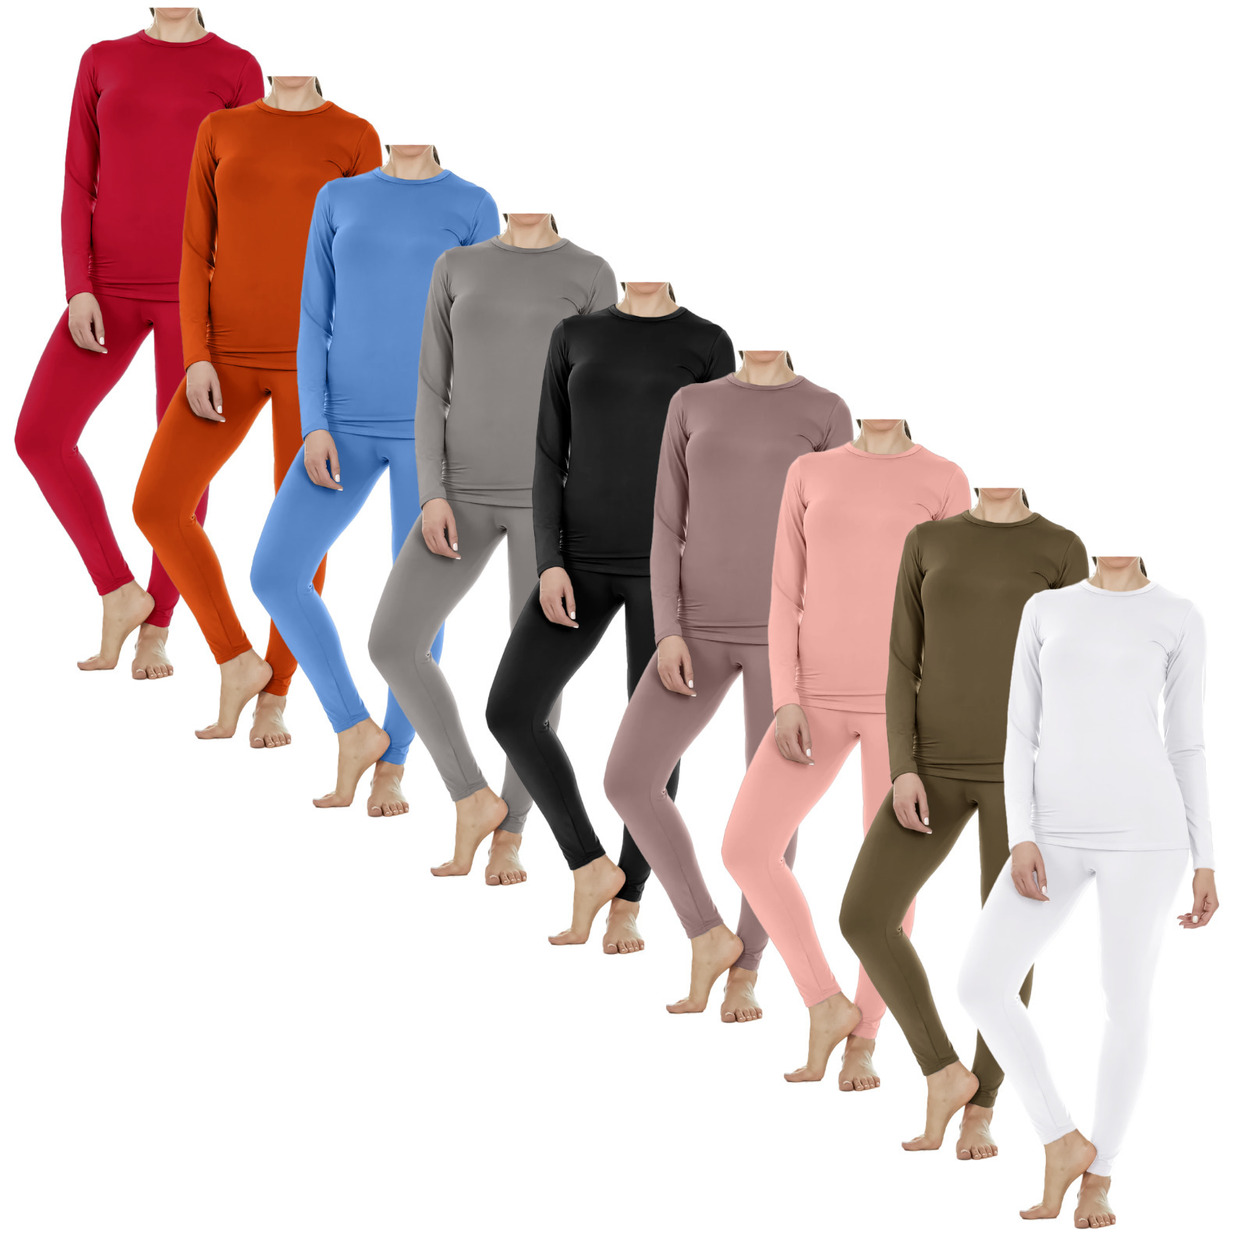 2-Set: Women's Fleece Lined Winter Warm Soft Thermal Sets For Cold Weather - Black&red, Small